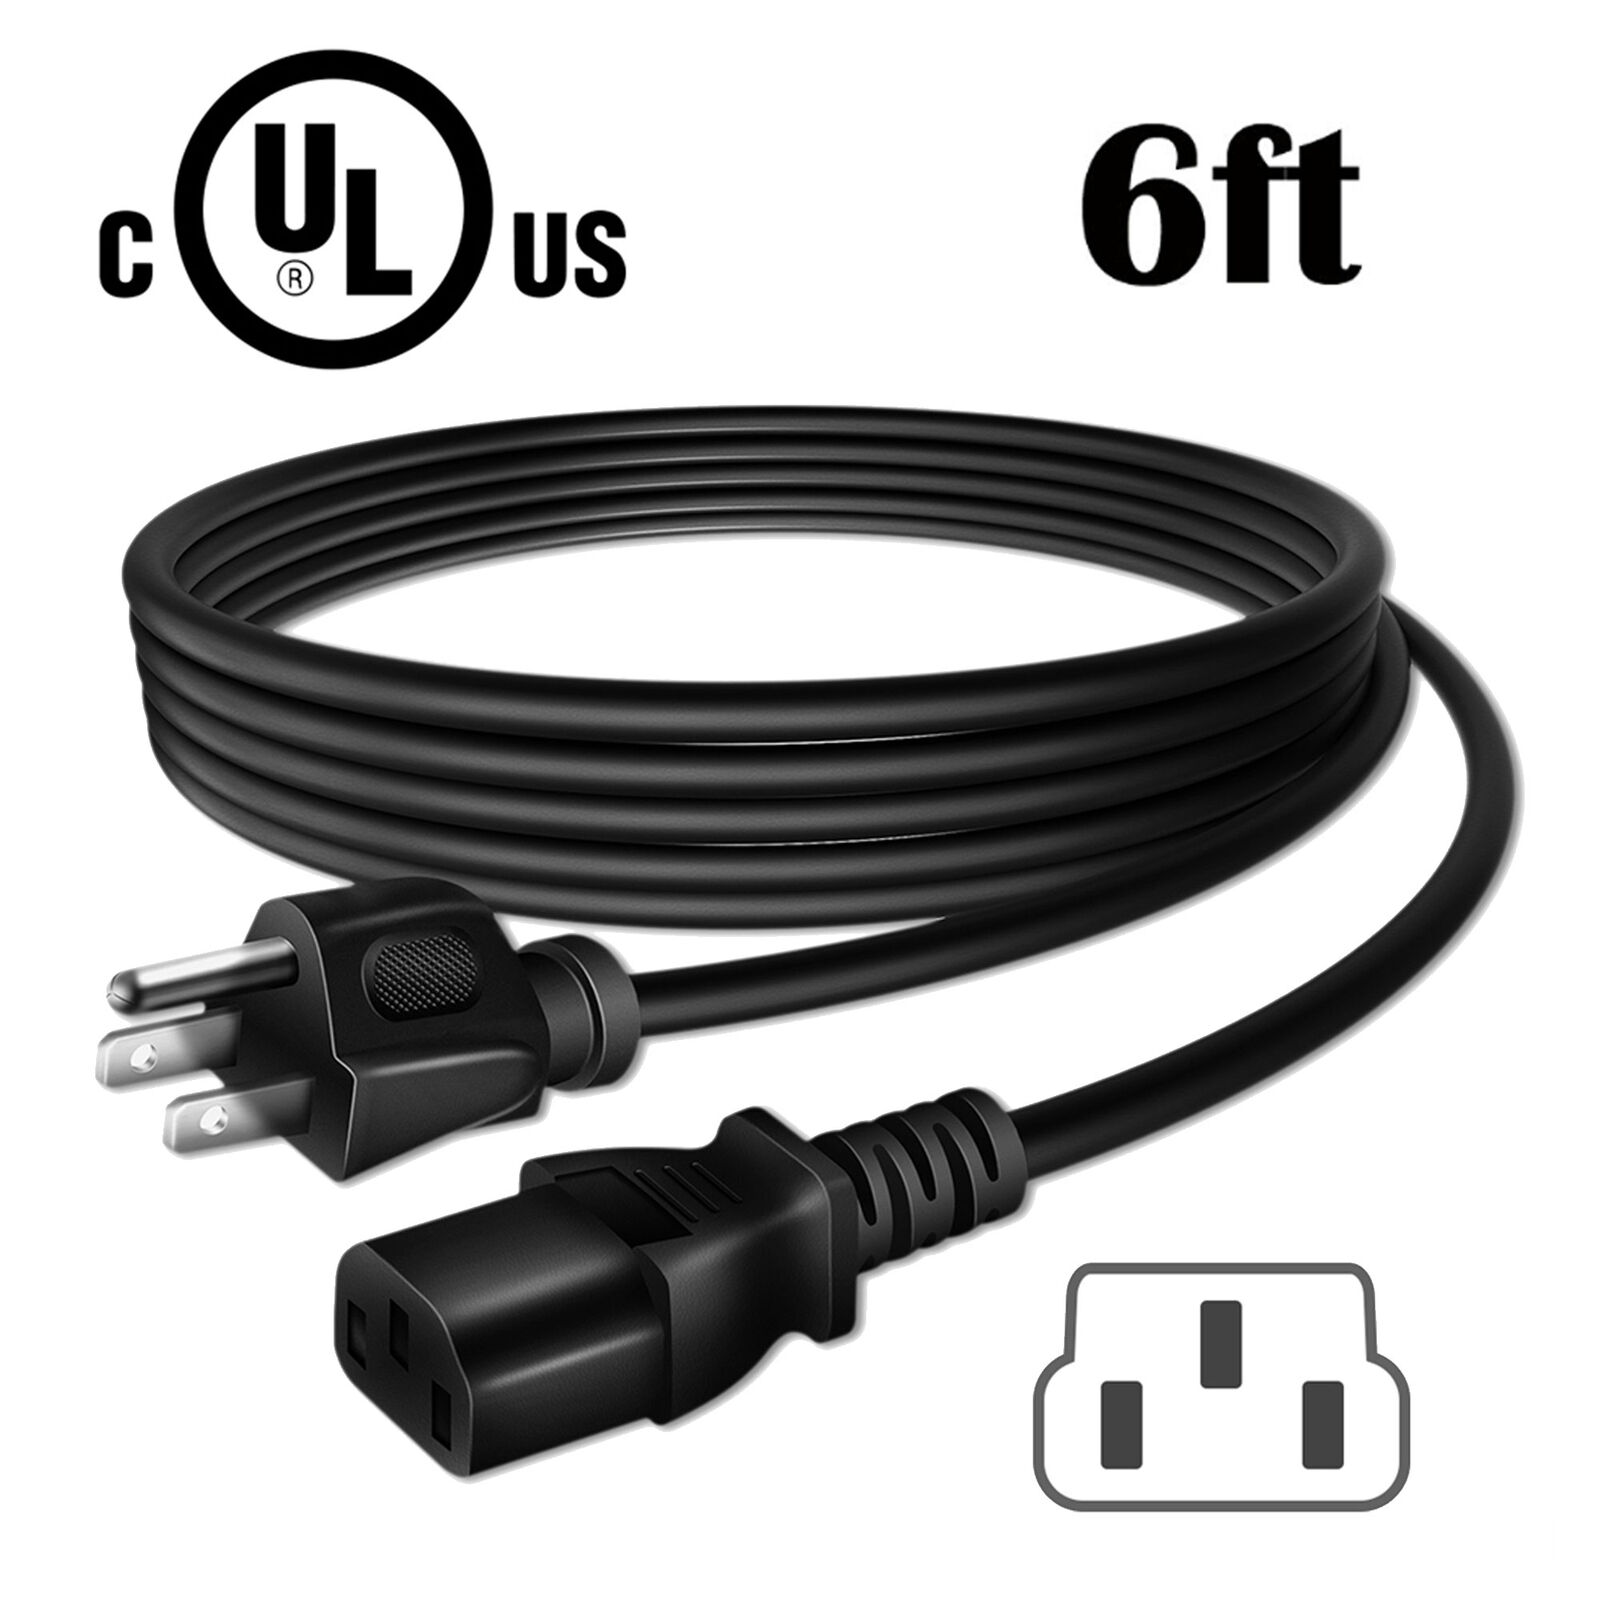 PwrON UL 6ft AC Power Cord For T-Fal Emeril Electric Pressure Cooker CY4000001